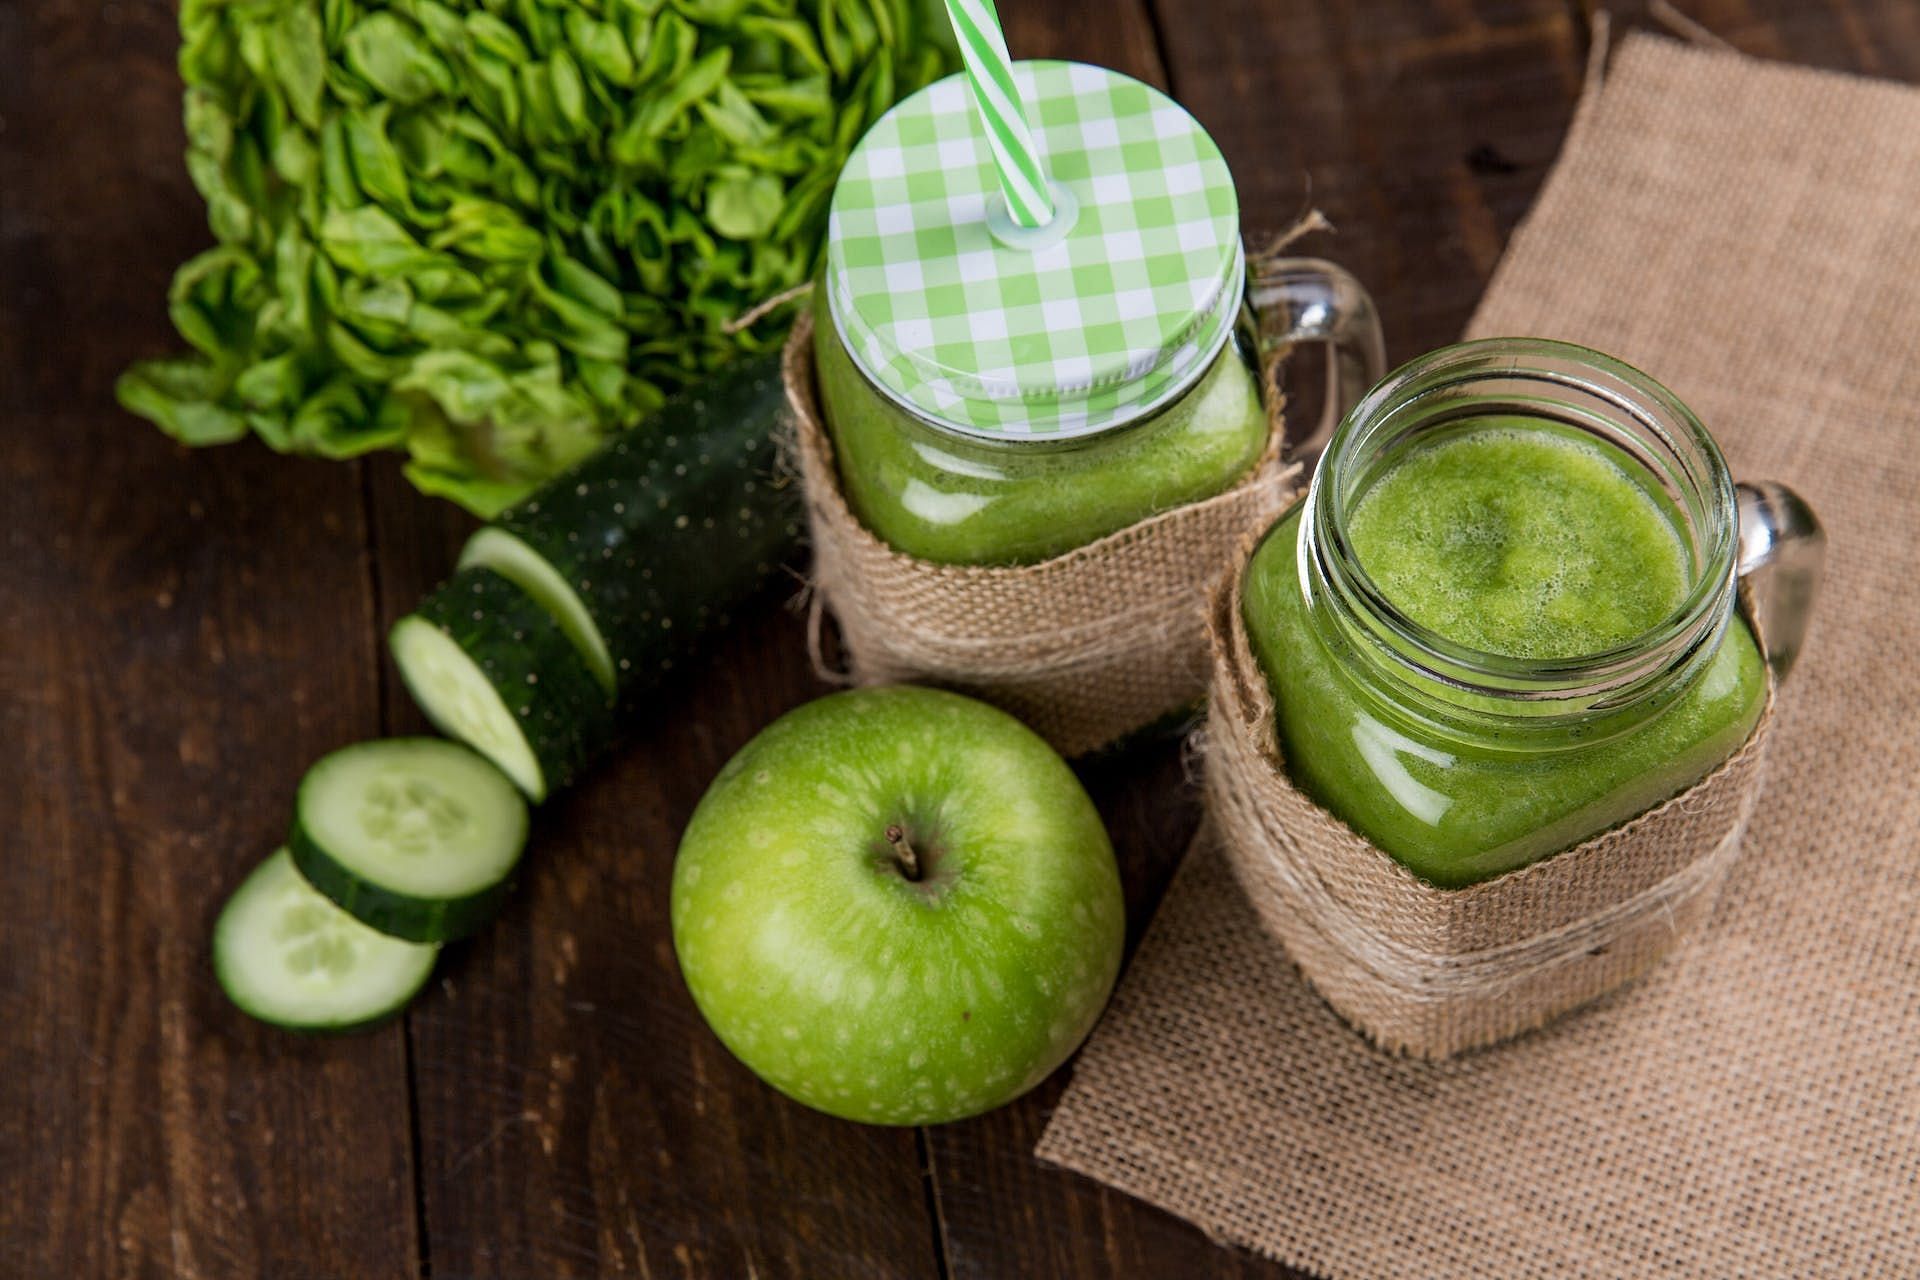 Green smoothies offer several health benefits. (Image via Pexels/Toni Cuenca)